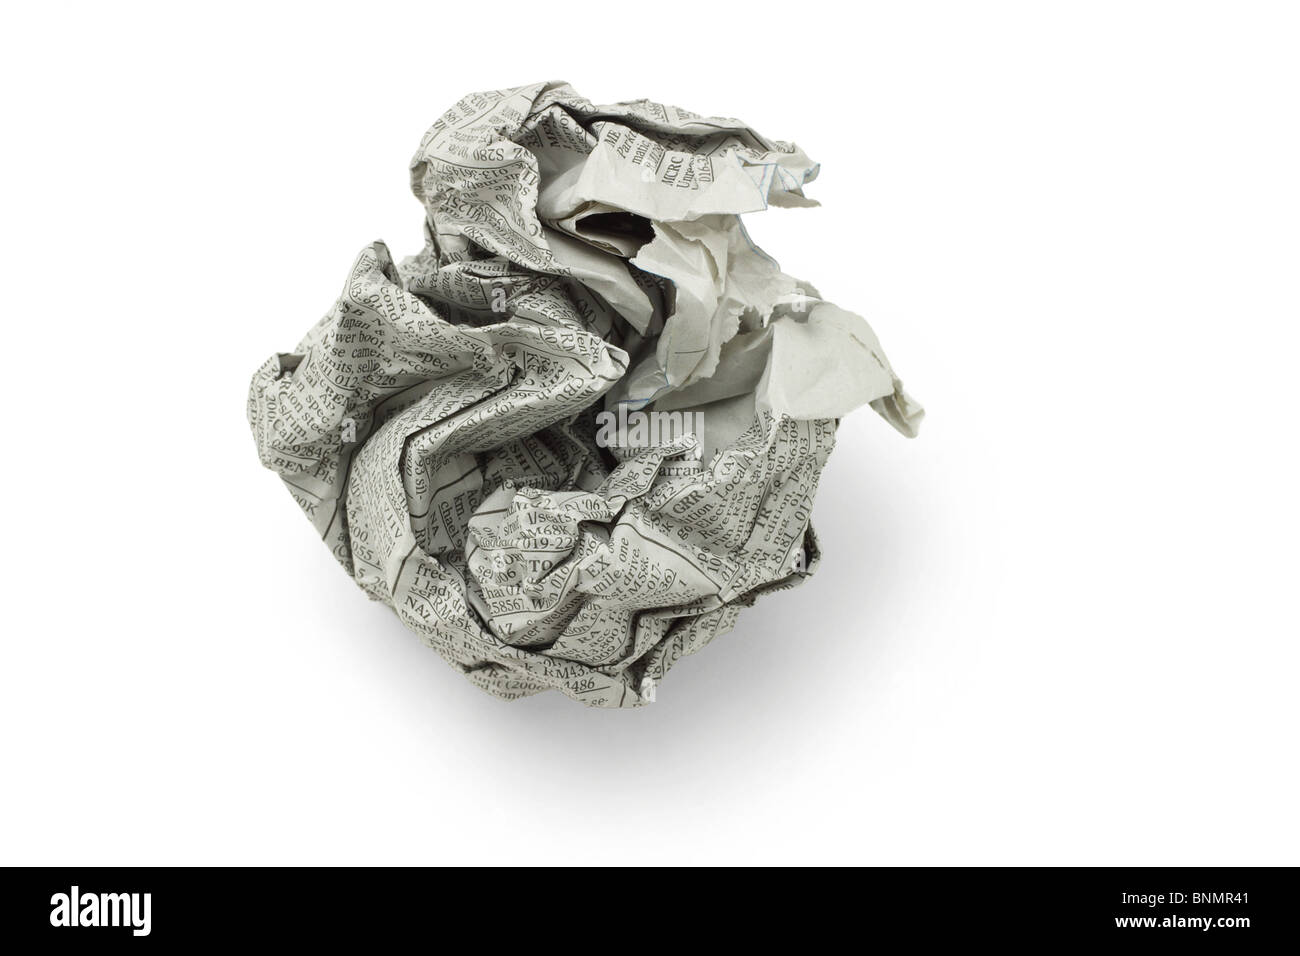 Crumpled newspaper in shape of ball on white background Stock Photo